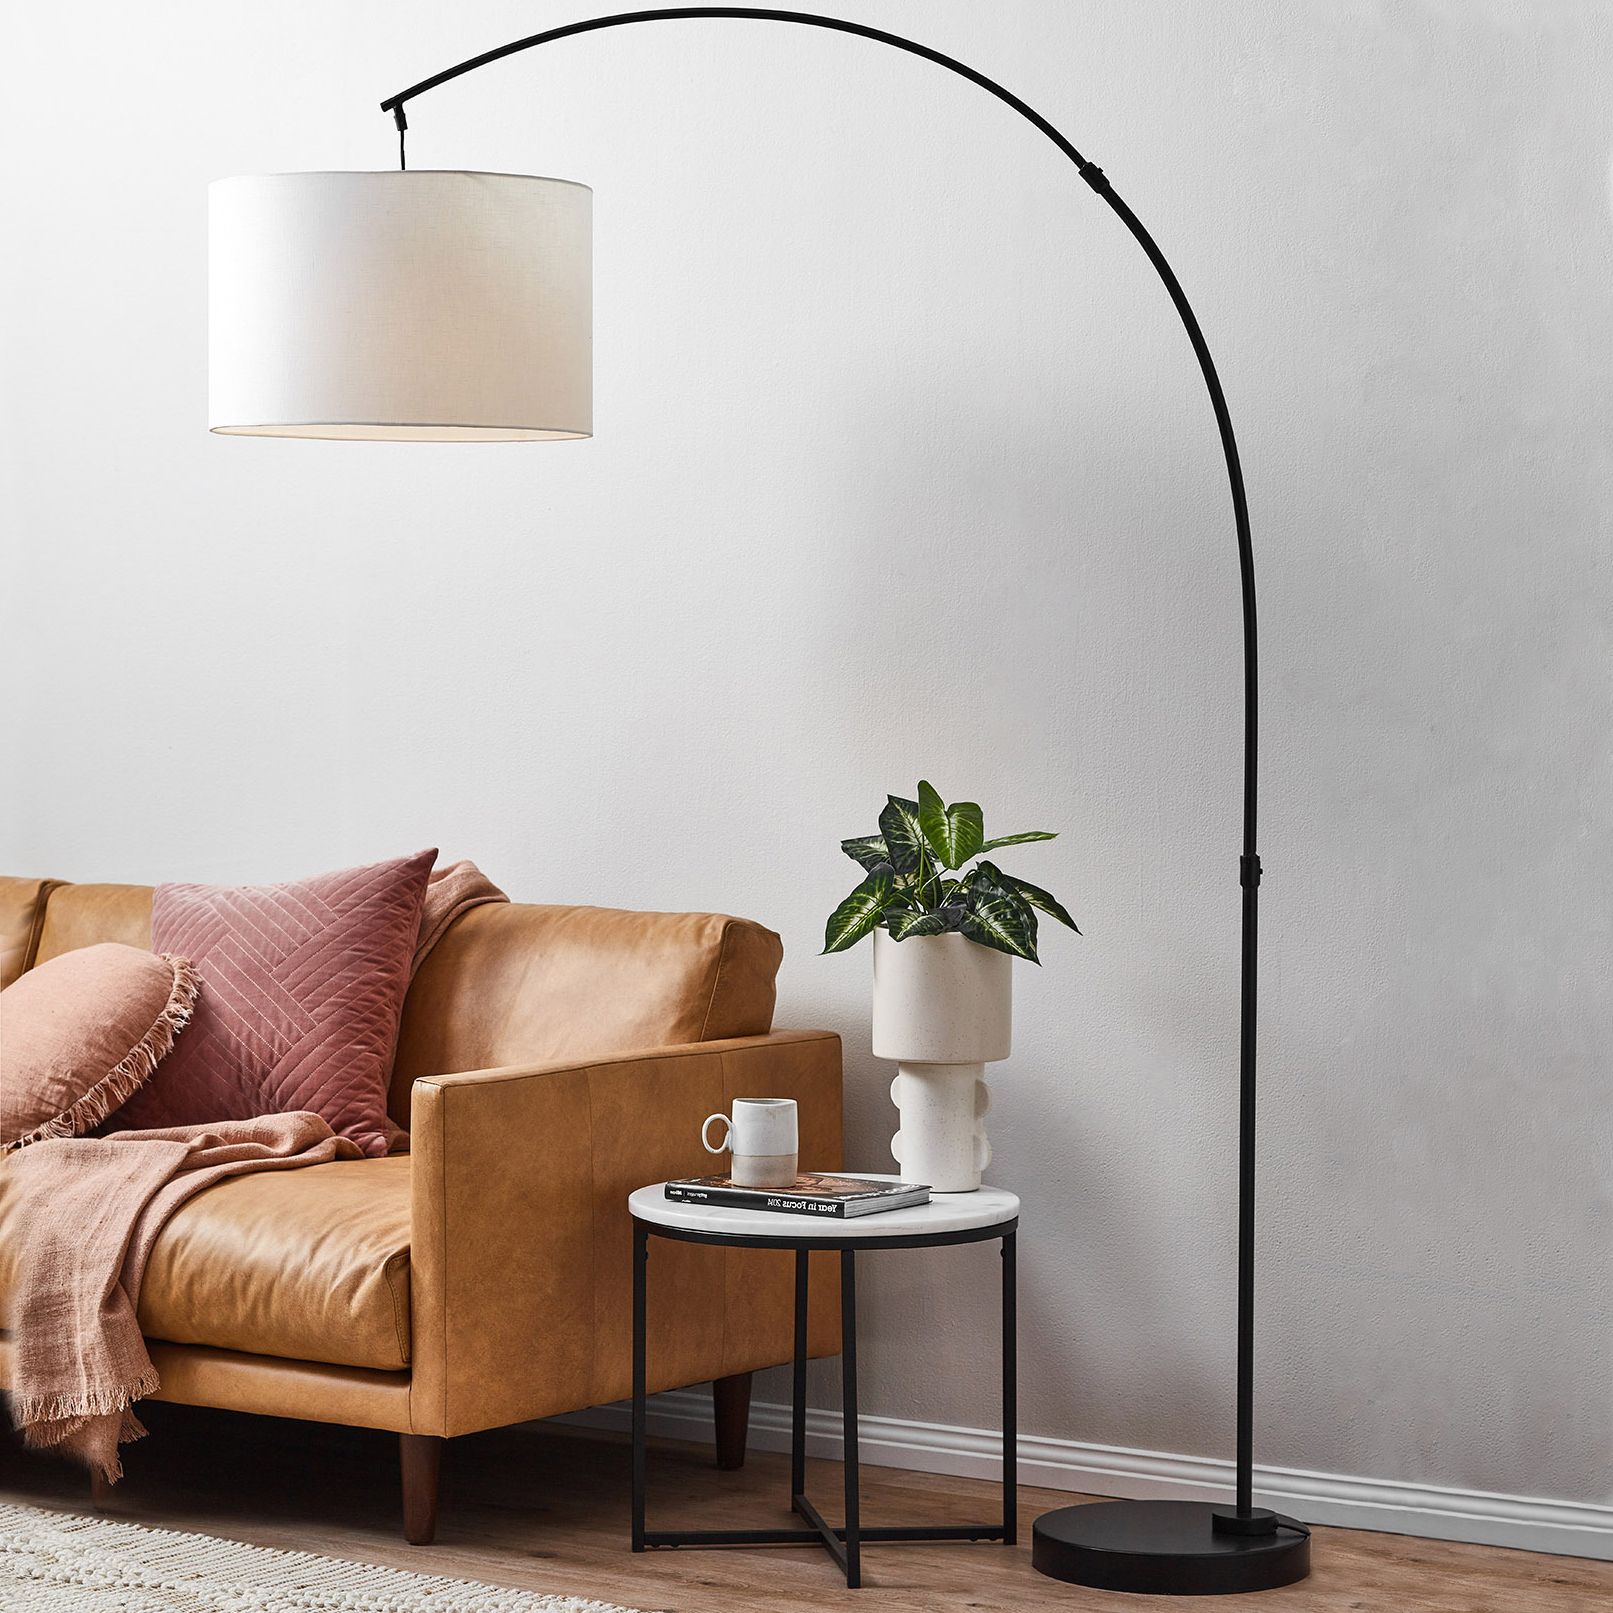 Temple & Webster Arc Floor Lamp For Arc Floor Lamps (View 6 of 20)